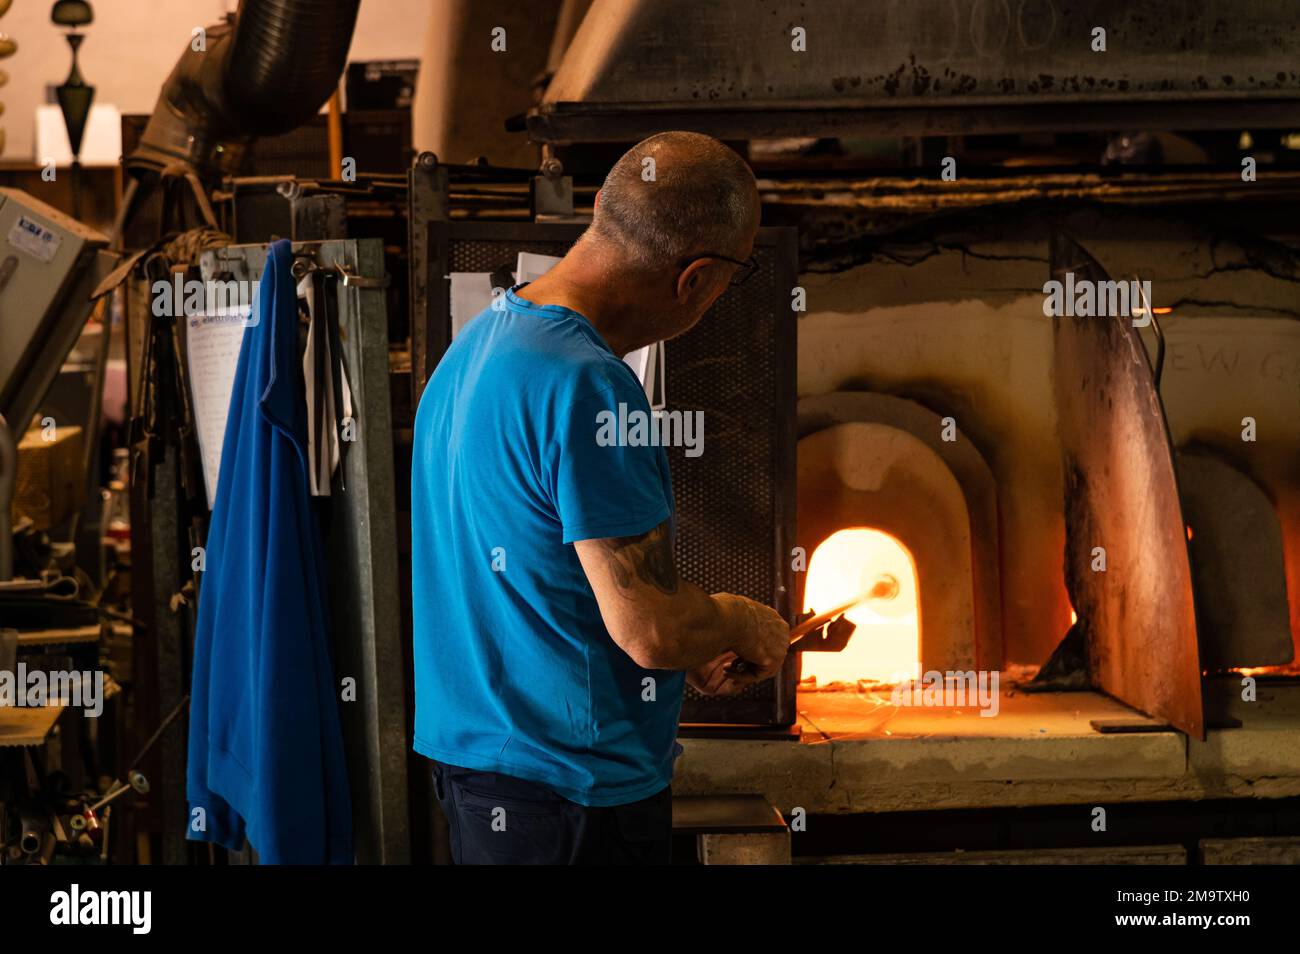 A glassworker holds an orb of glass in one of the ovens at a factor on the island of Murano, in the Venice region of Italy. Stock Photo